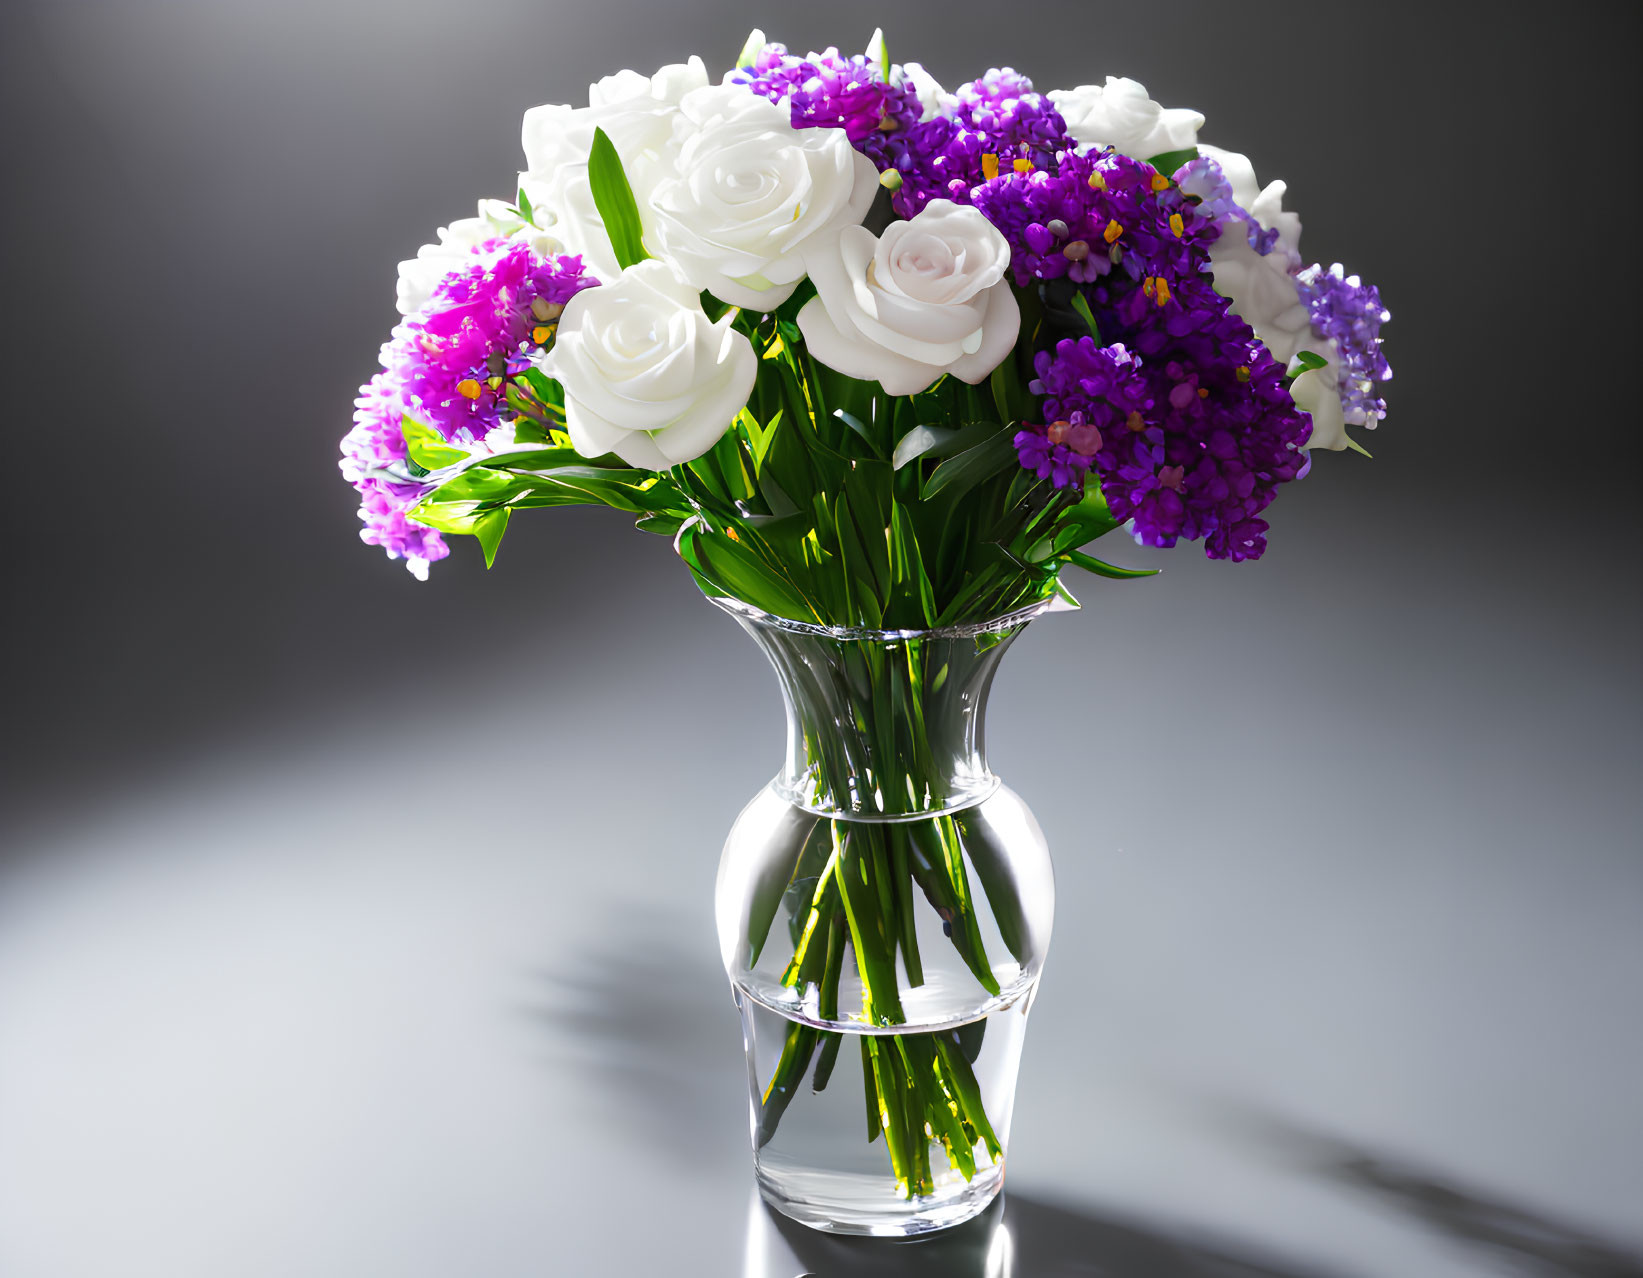 White Roses and Purple Flowers in Clear Glass Vase on Gray Background